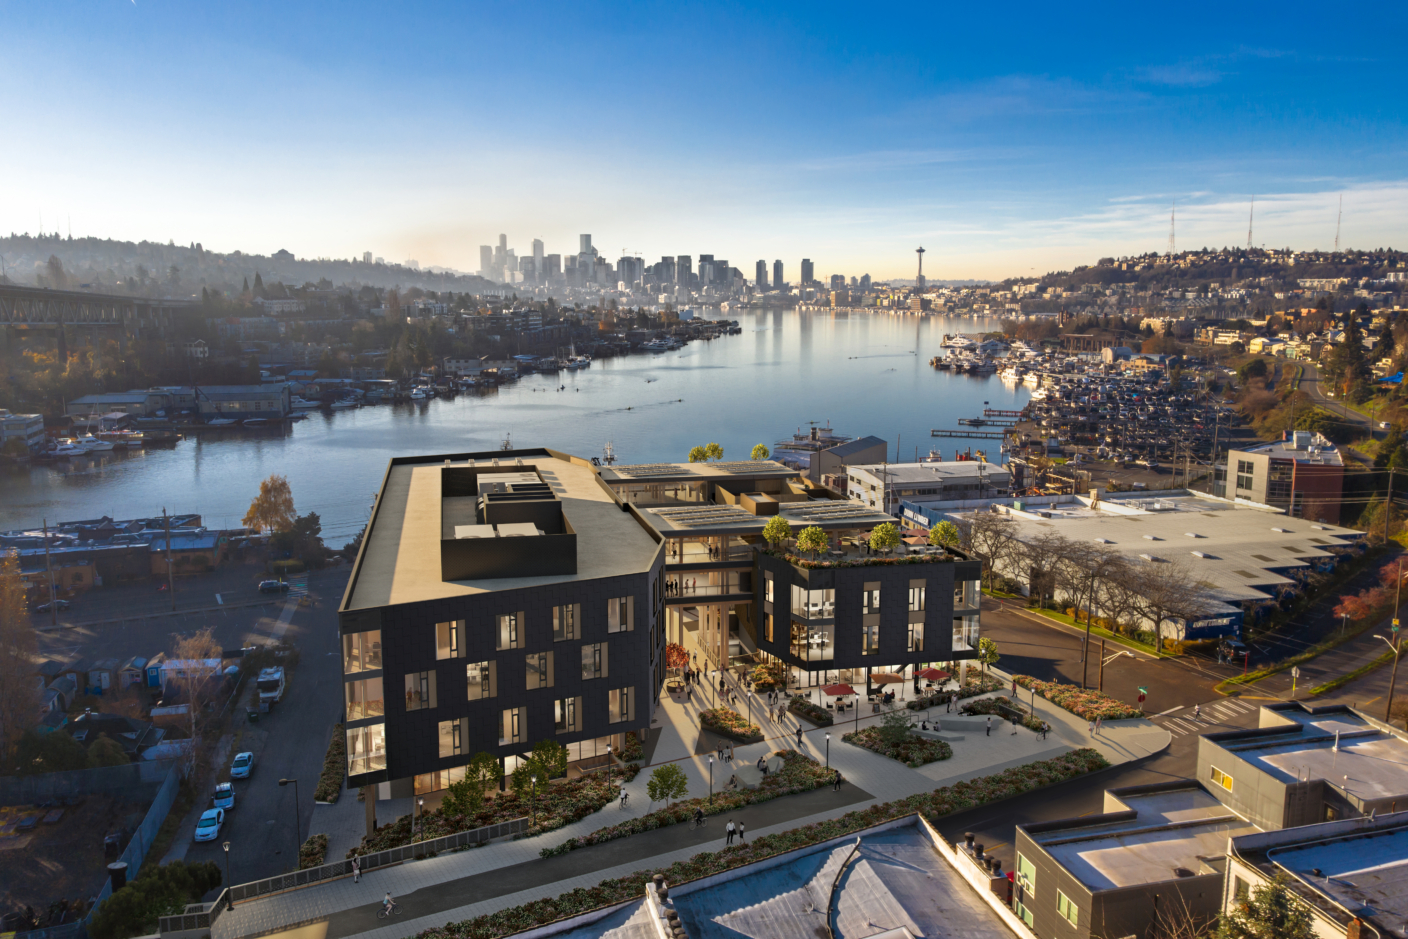 Get a first hand look at Northlake Commons, Seattle's largest mass timber lab-ready office building. The design team will guide a tour through the active construction site to discuss the design process, outcomes and highlight key considerations for building with mass timber.